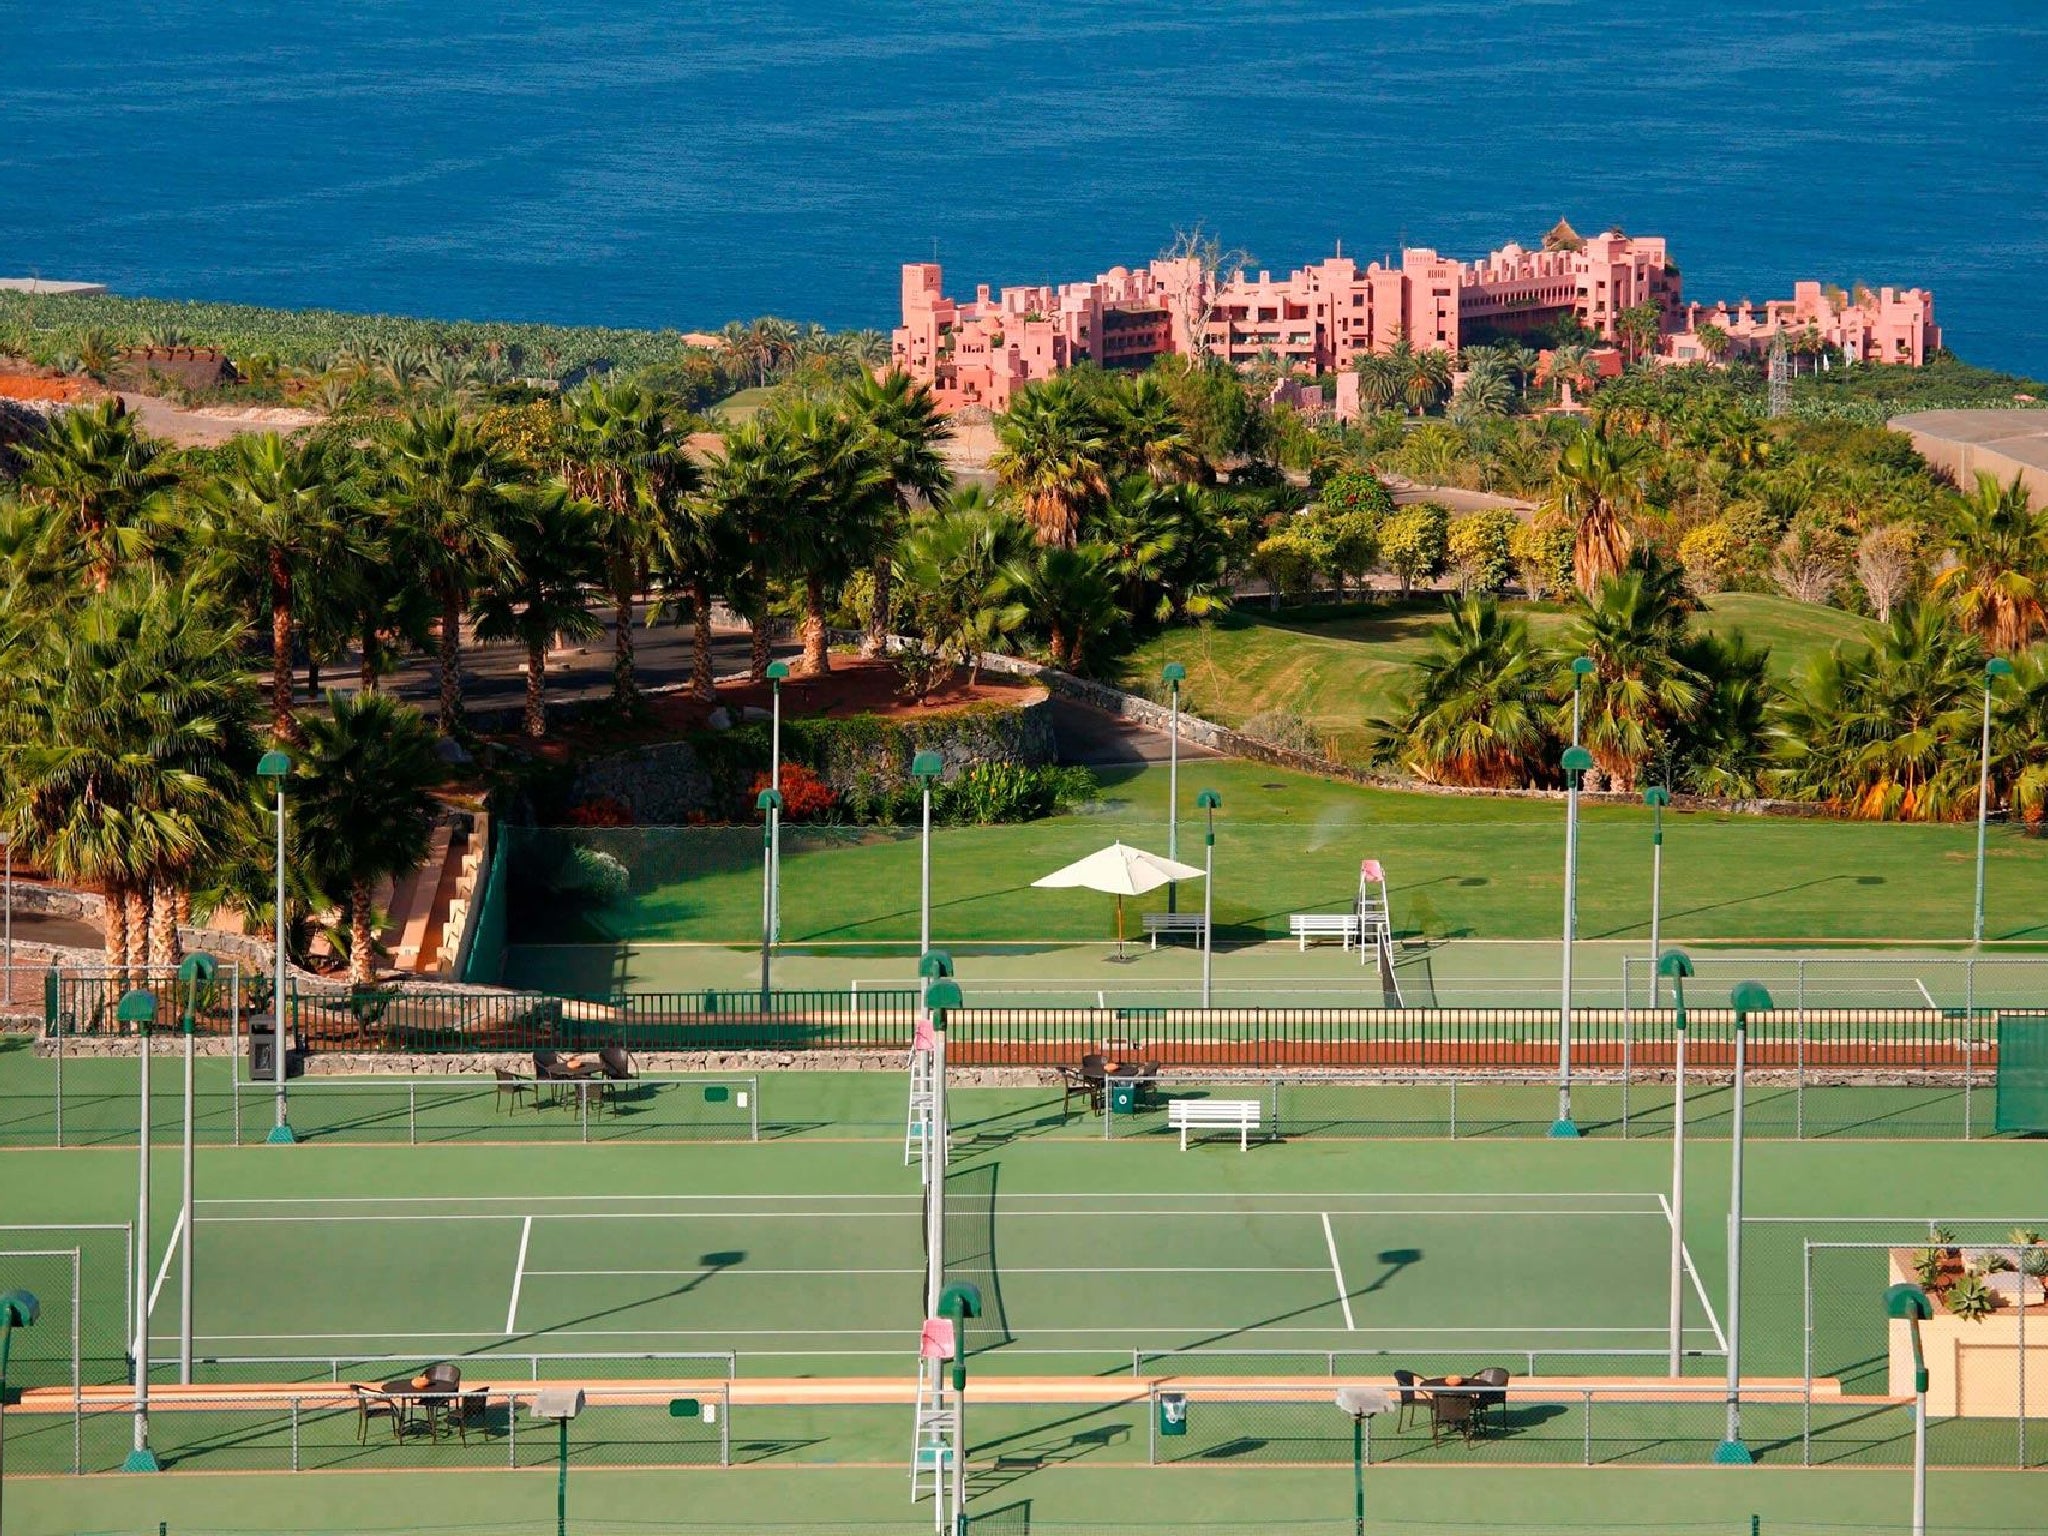 Seven all-surface courts and floodlights mean tennis can be enjoyed all year round